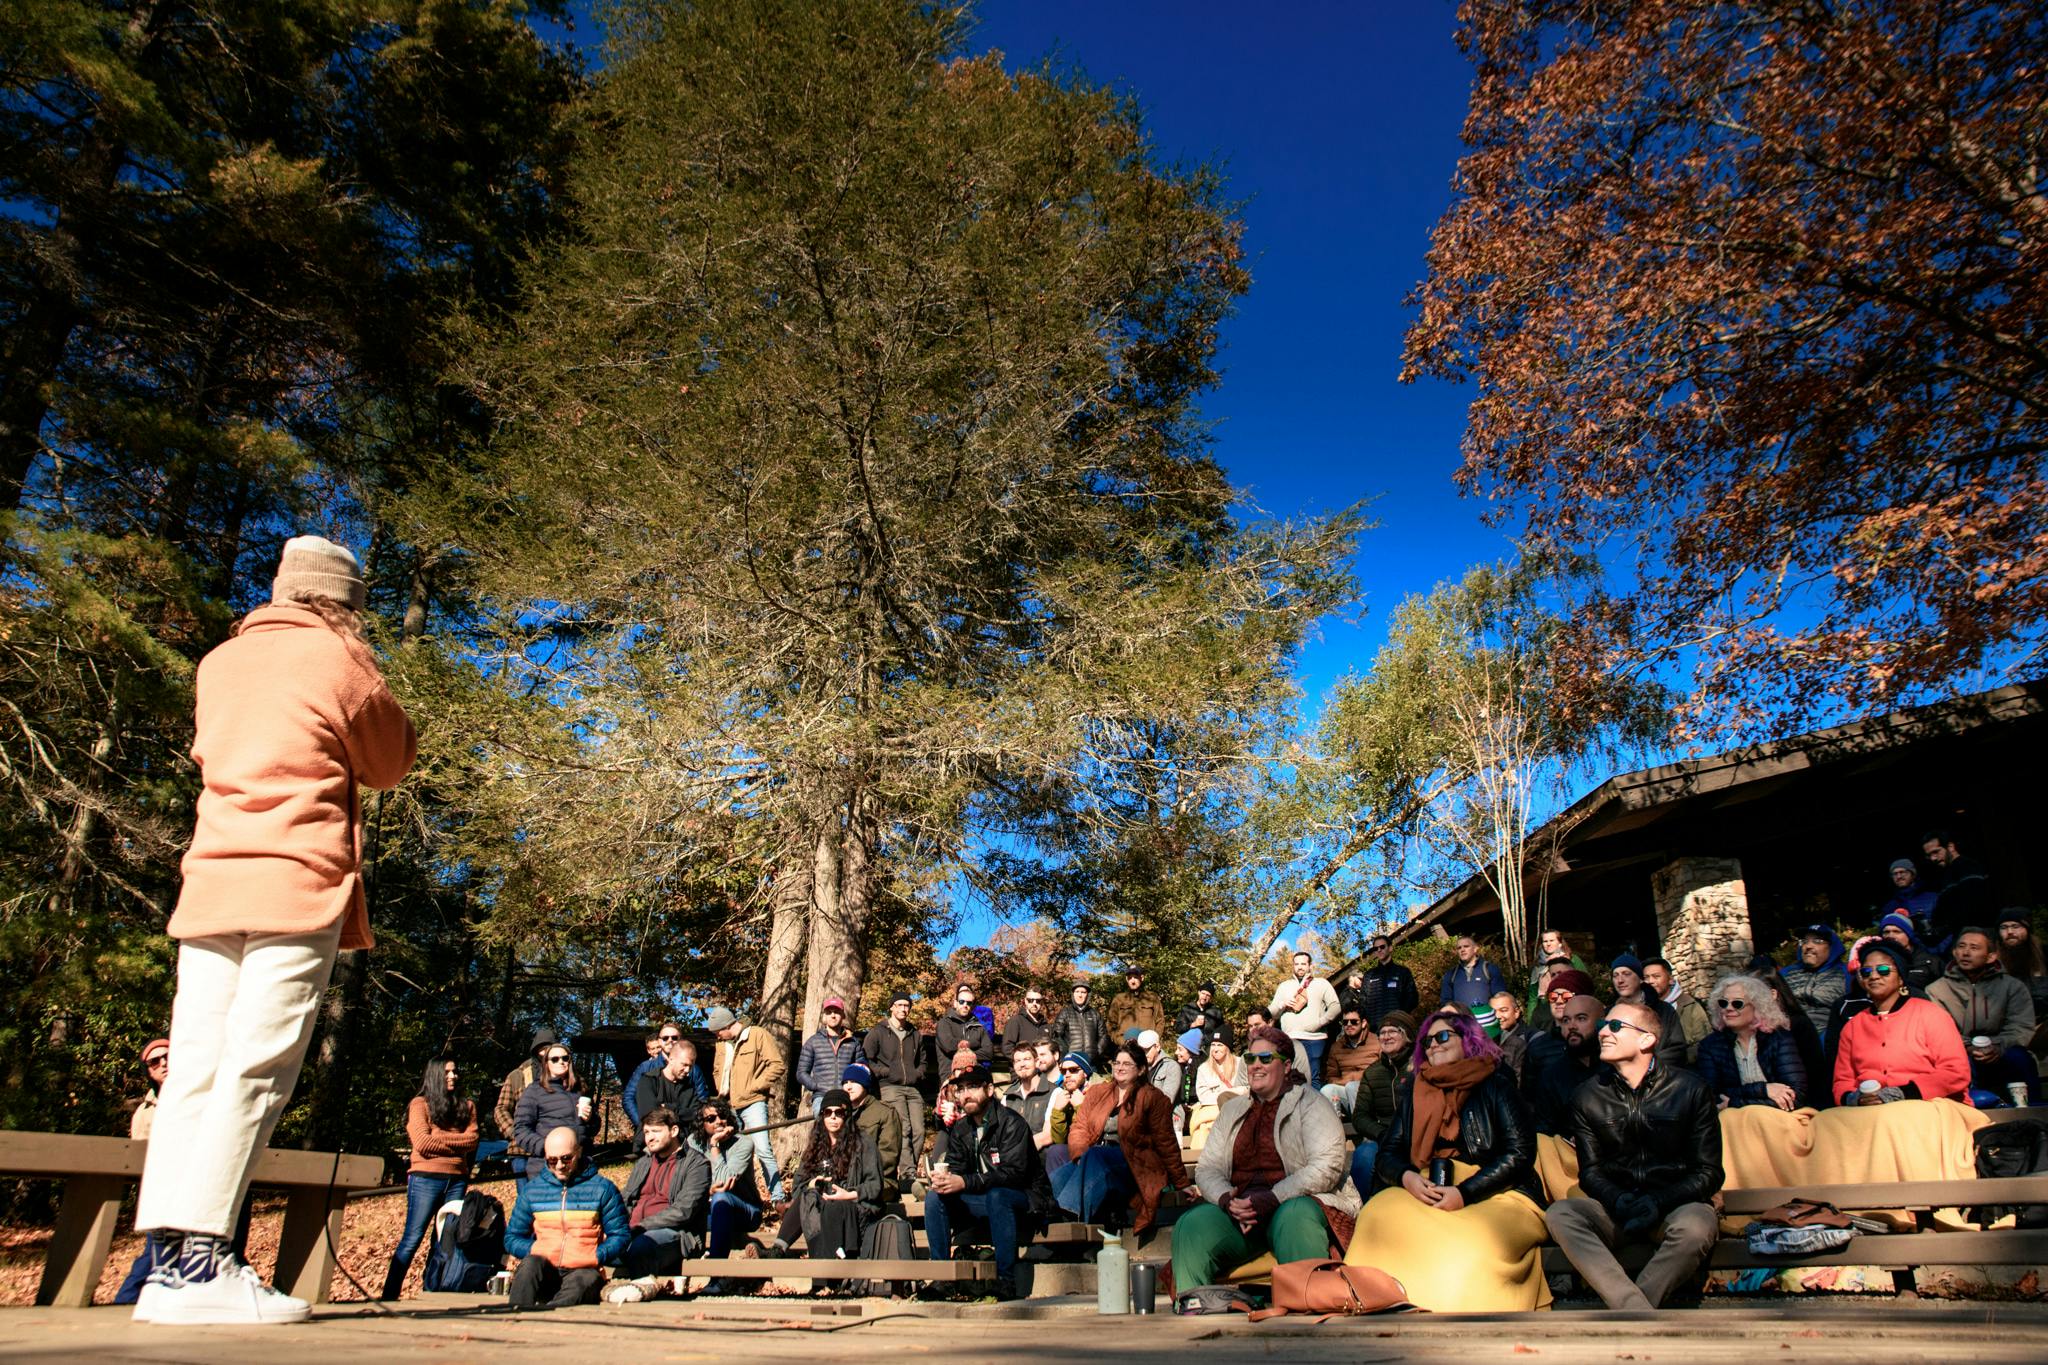 Group of people gathered under fall foliage